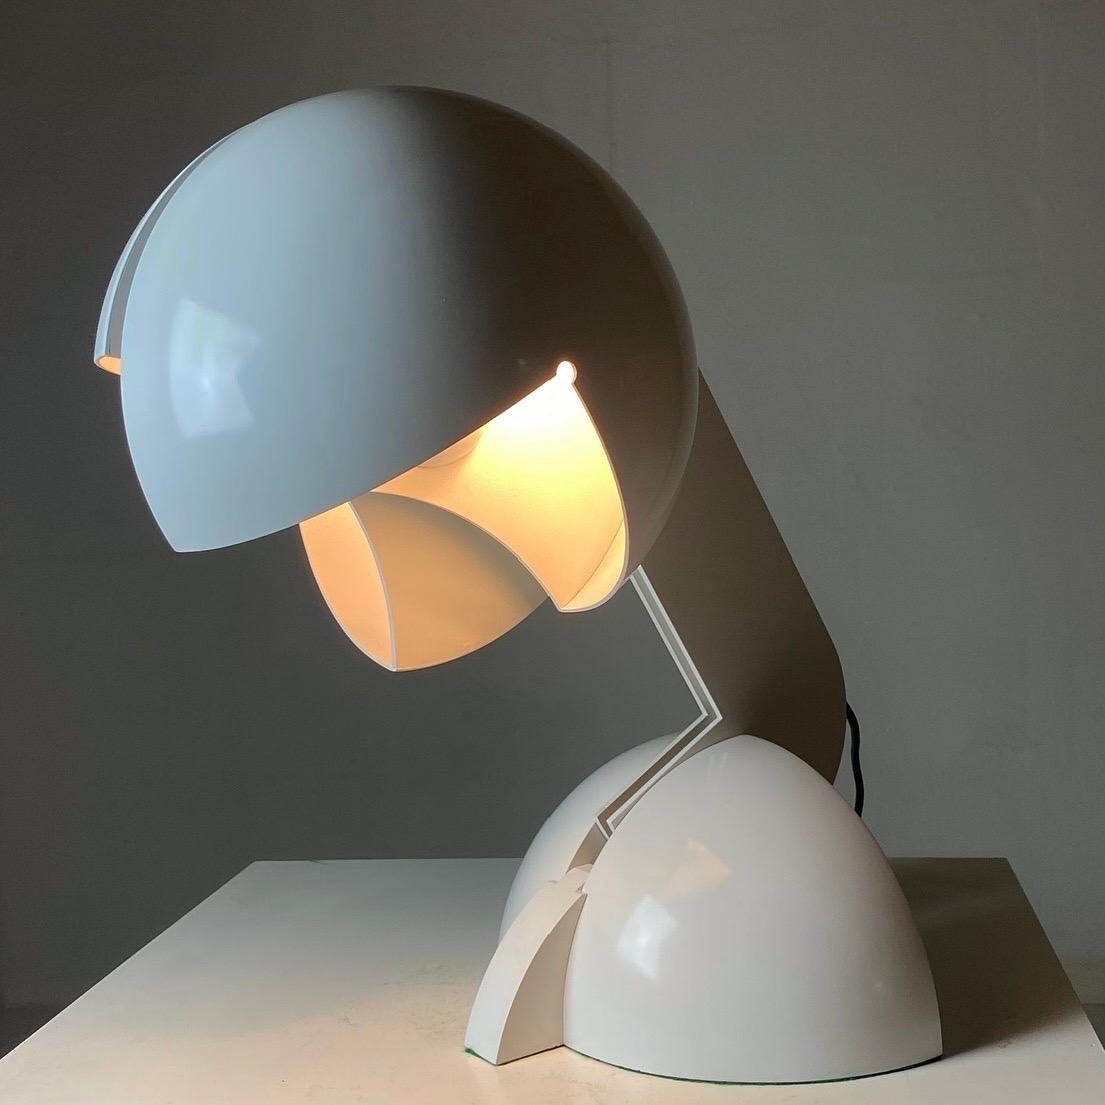 Lacquer Ruspa Table Lamp by Gae Aulenti for Martinelli Luce, Italy 1970s For Sale